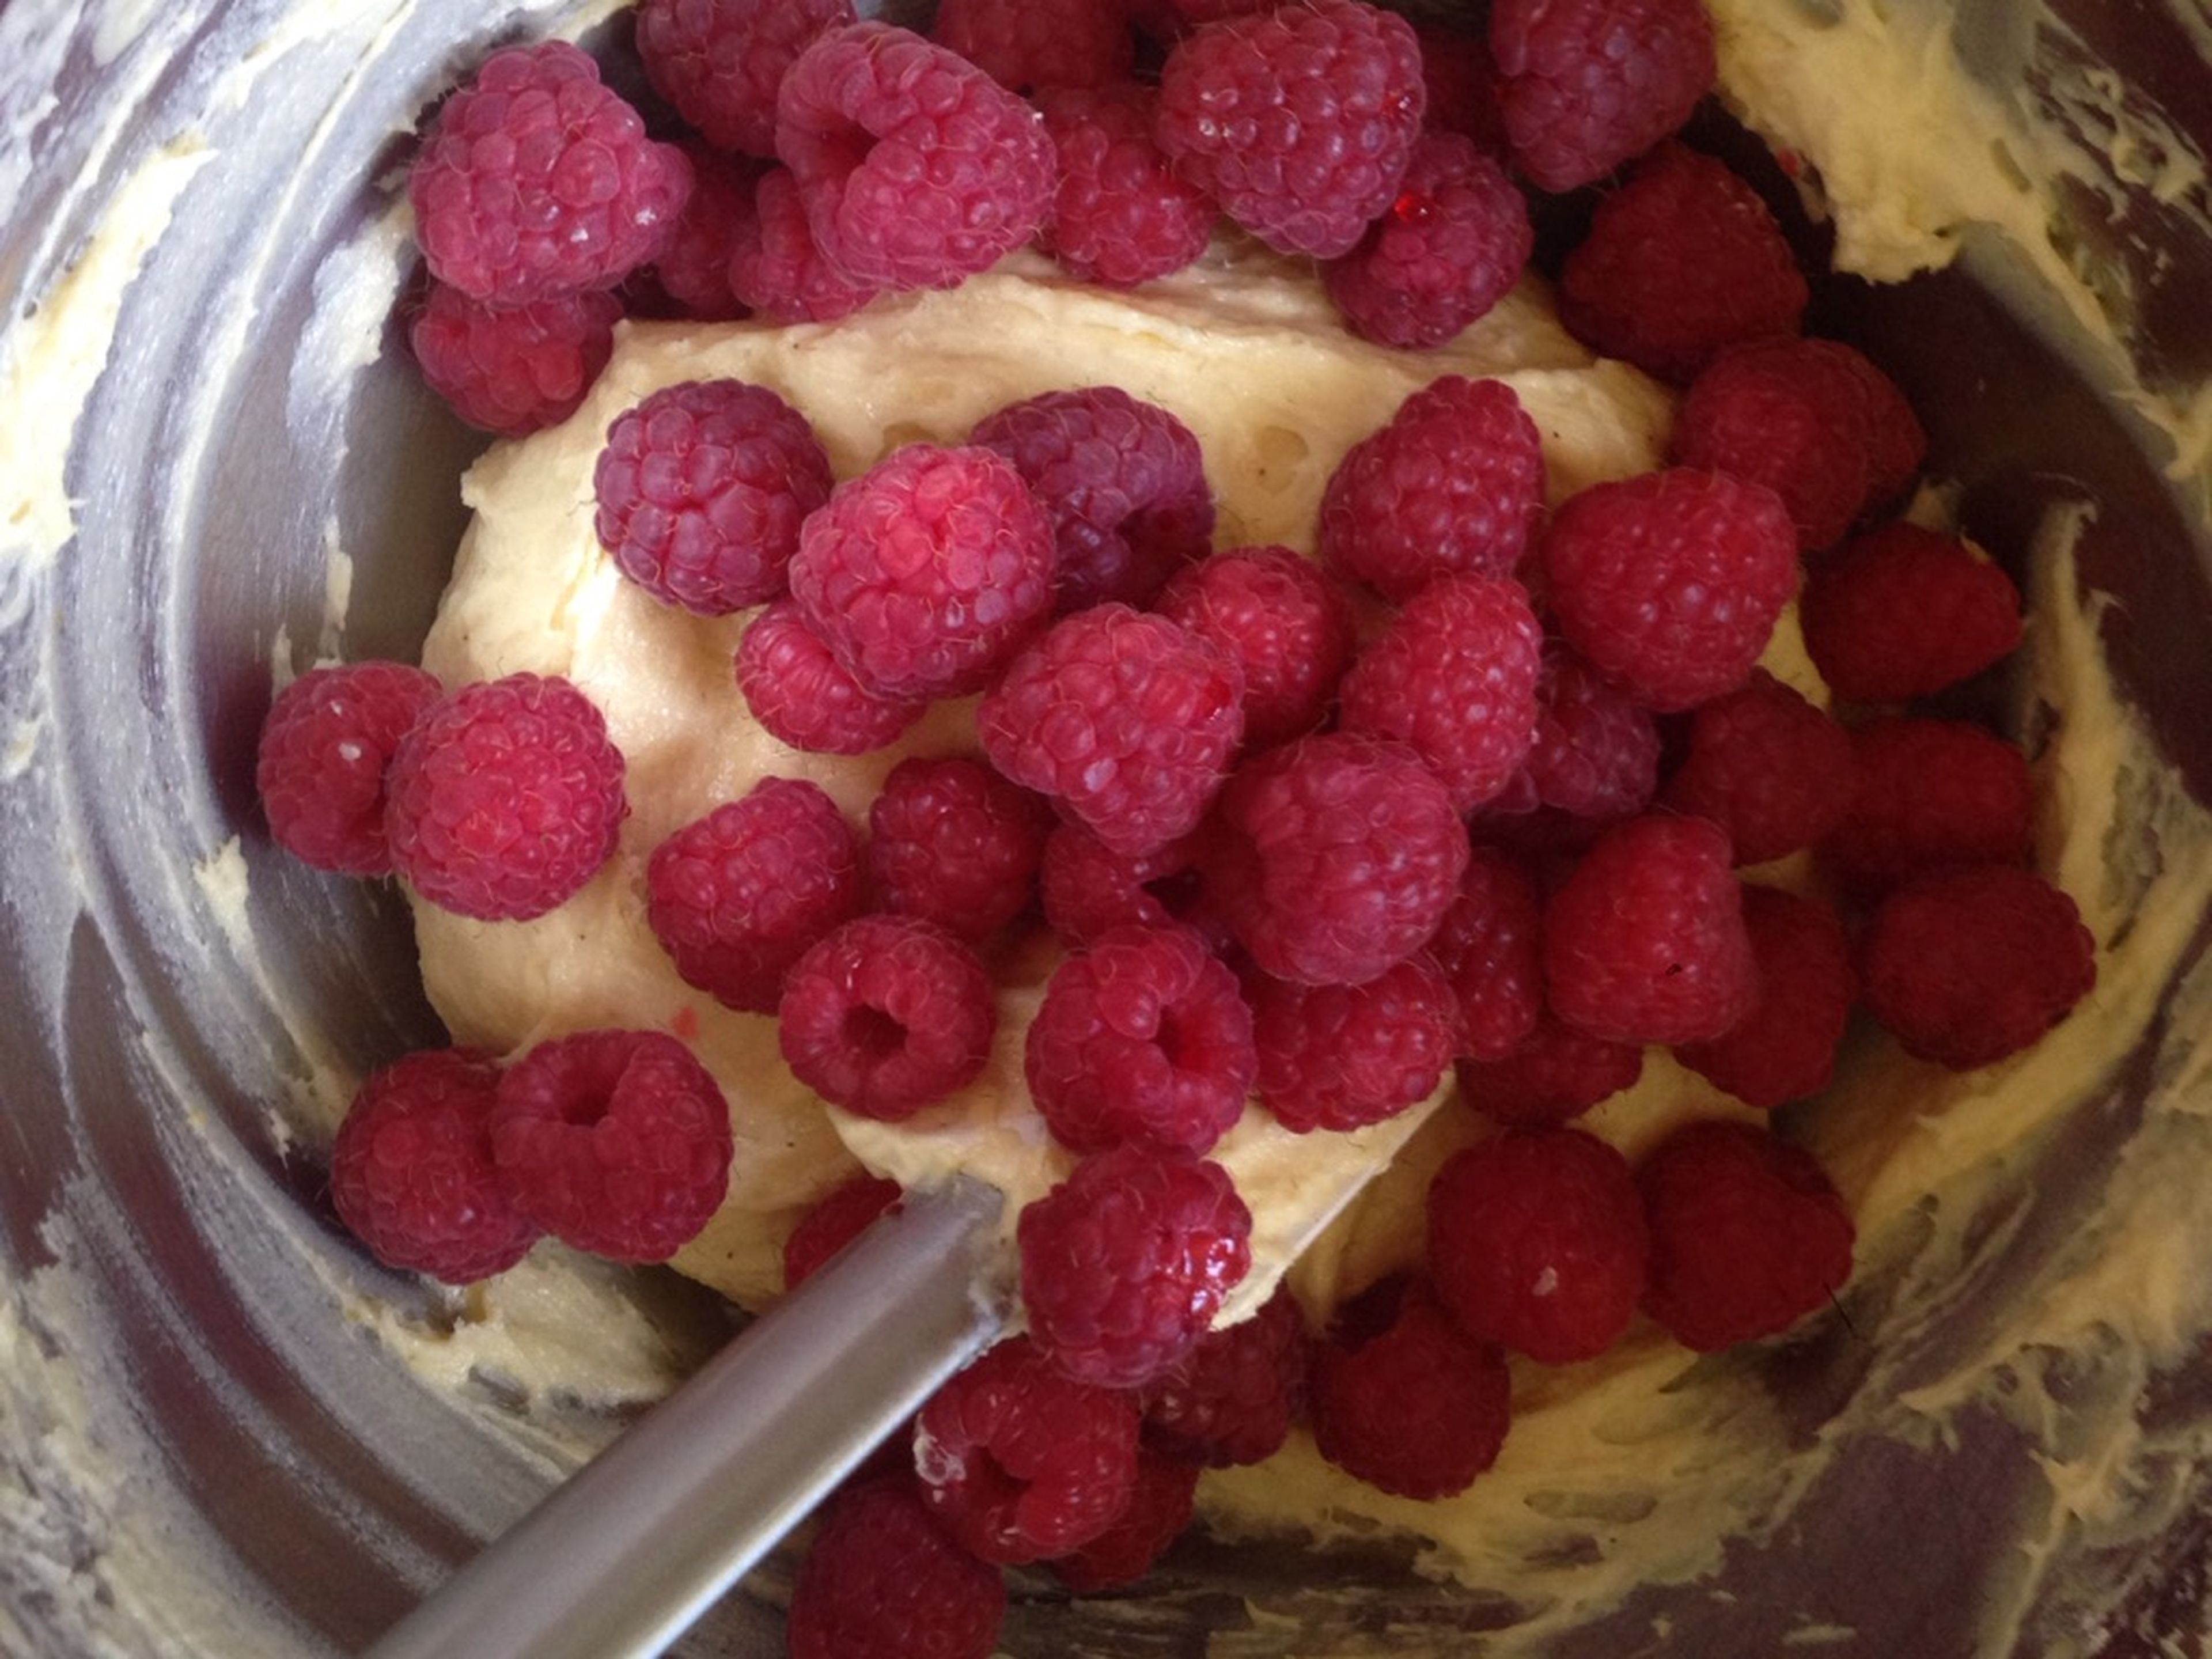 Add raspberries and stir carefully. Transfer to a muffin tin lined with muffin liners.